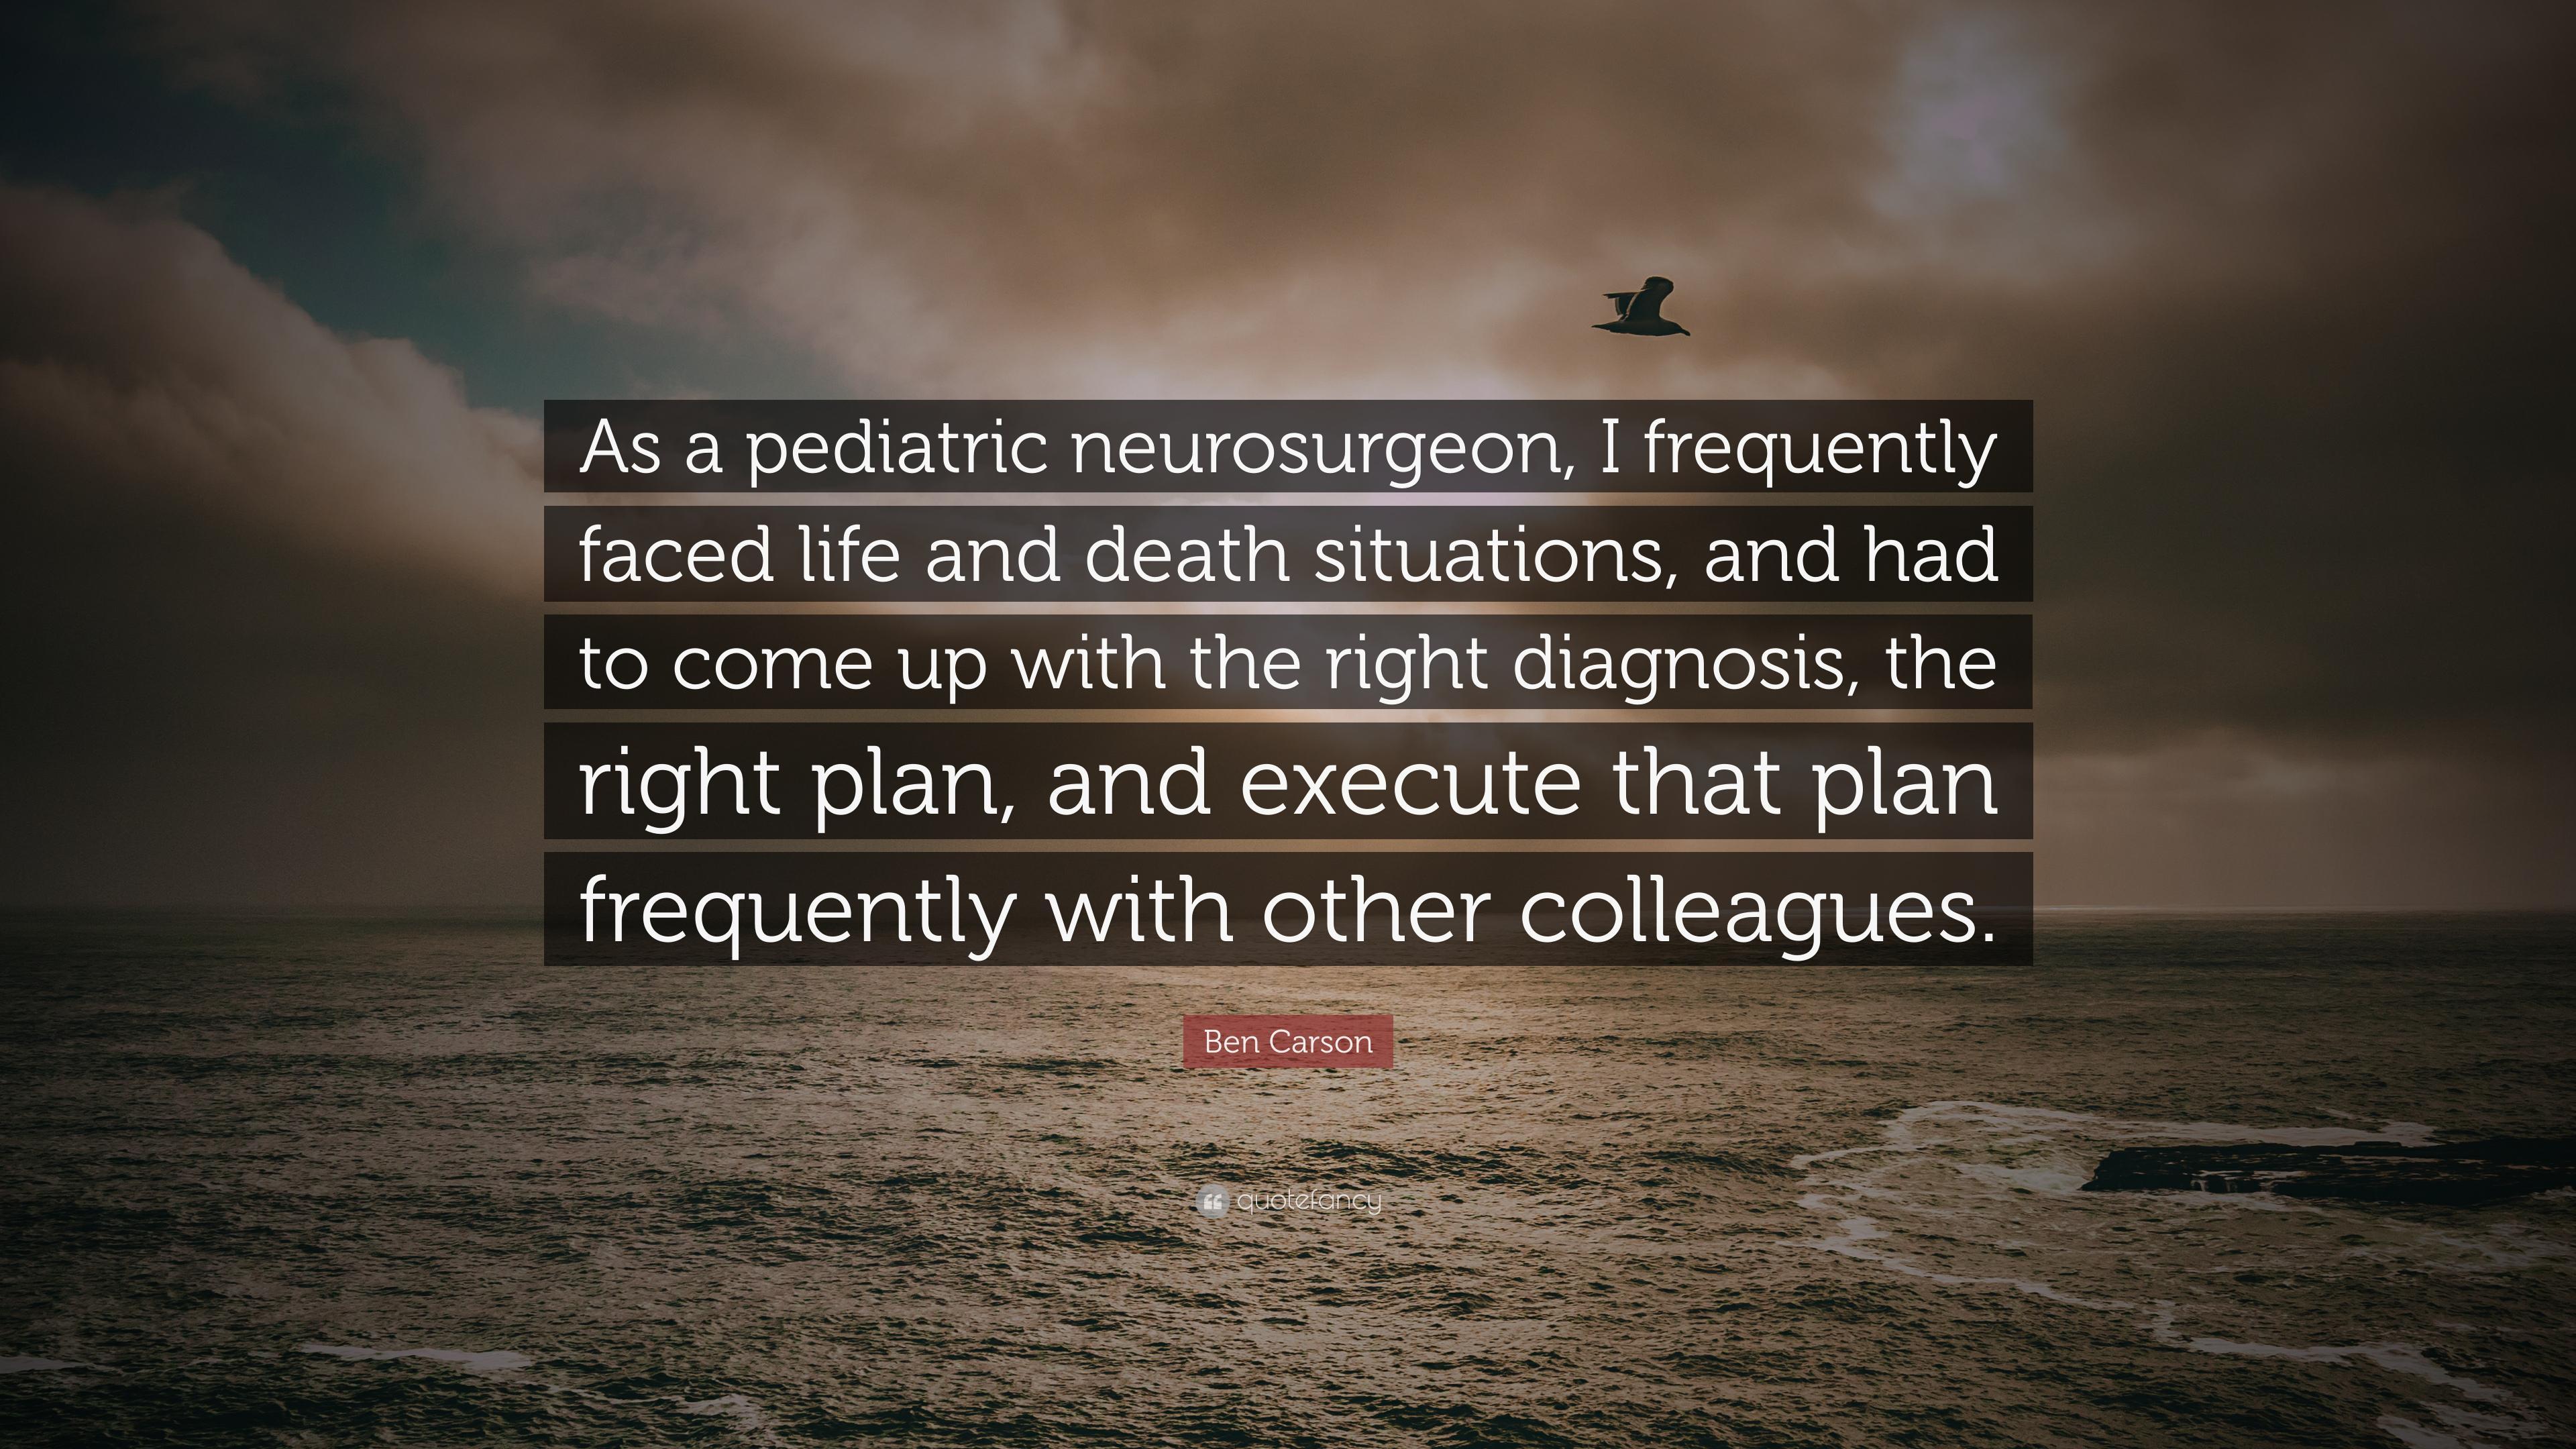 Ben Carson Quote: “As a pediatric neurosurgeon, I frequently faced